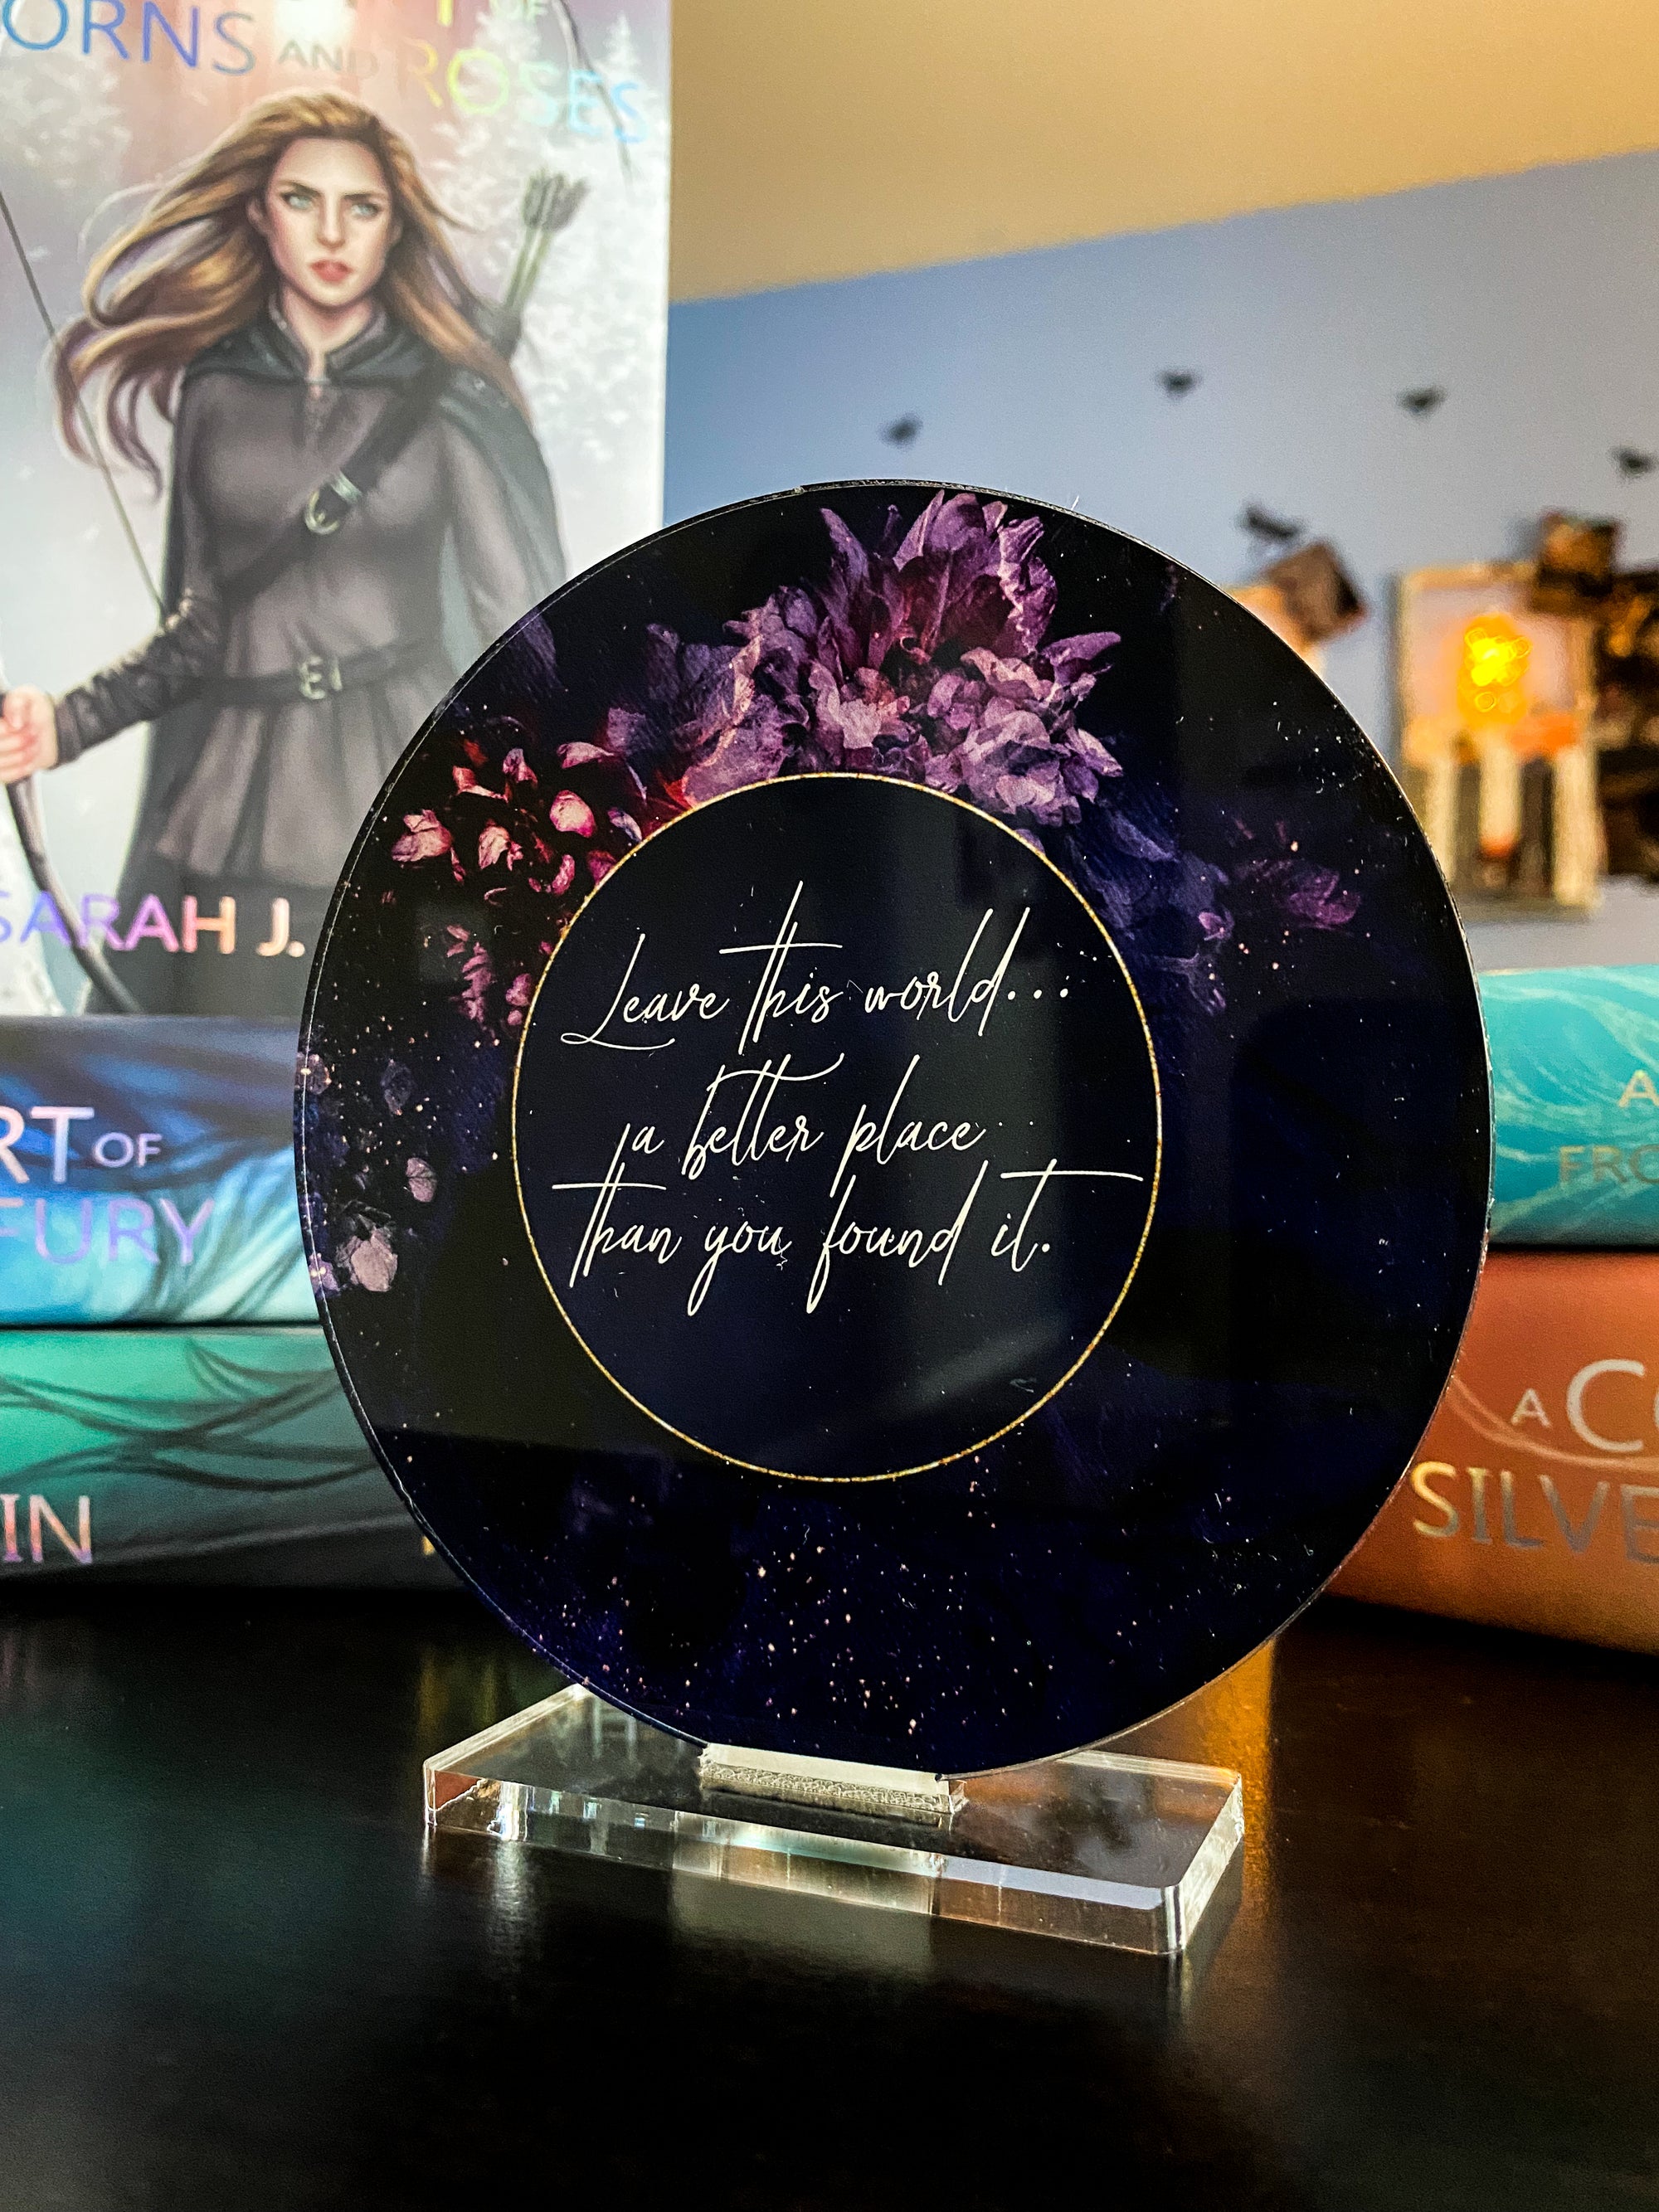 "Leave this world... a better place than you found it." - A Court of Thorns and Roses Series / A Court of Wings and Ruin - Freestanding Bookshelf / Desktop Acrylic Accessory - Officially licensed by Sarah J. Maas - D2